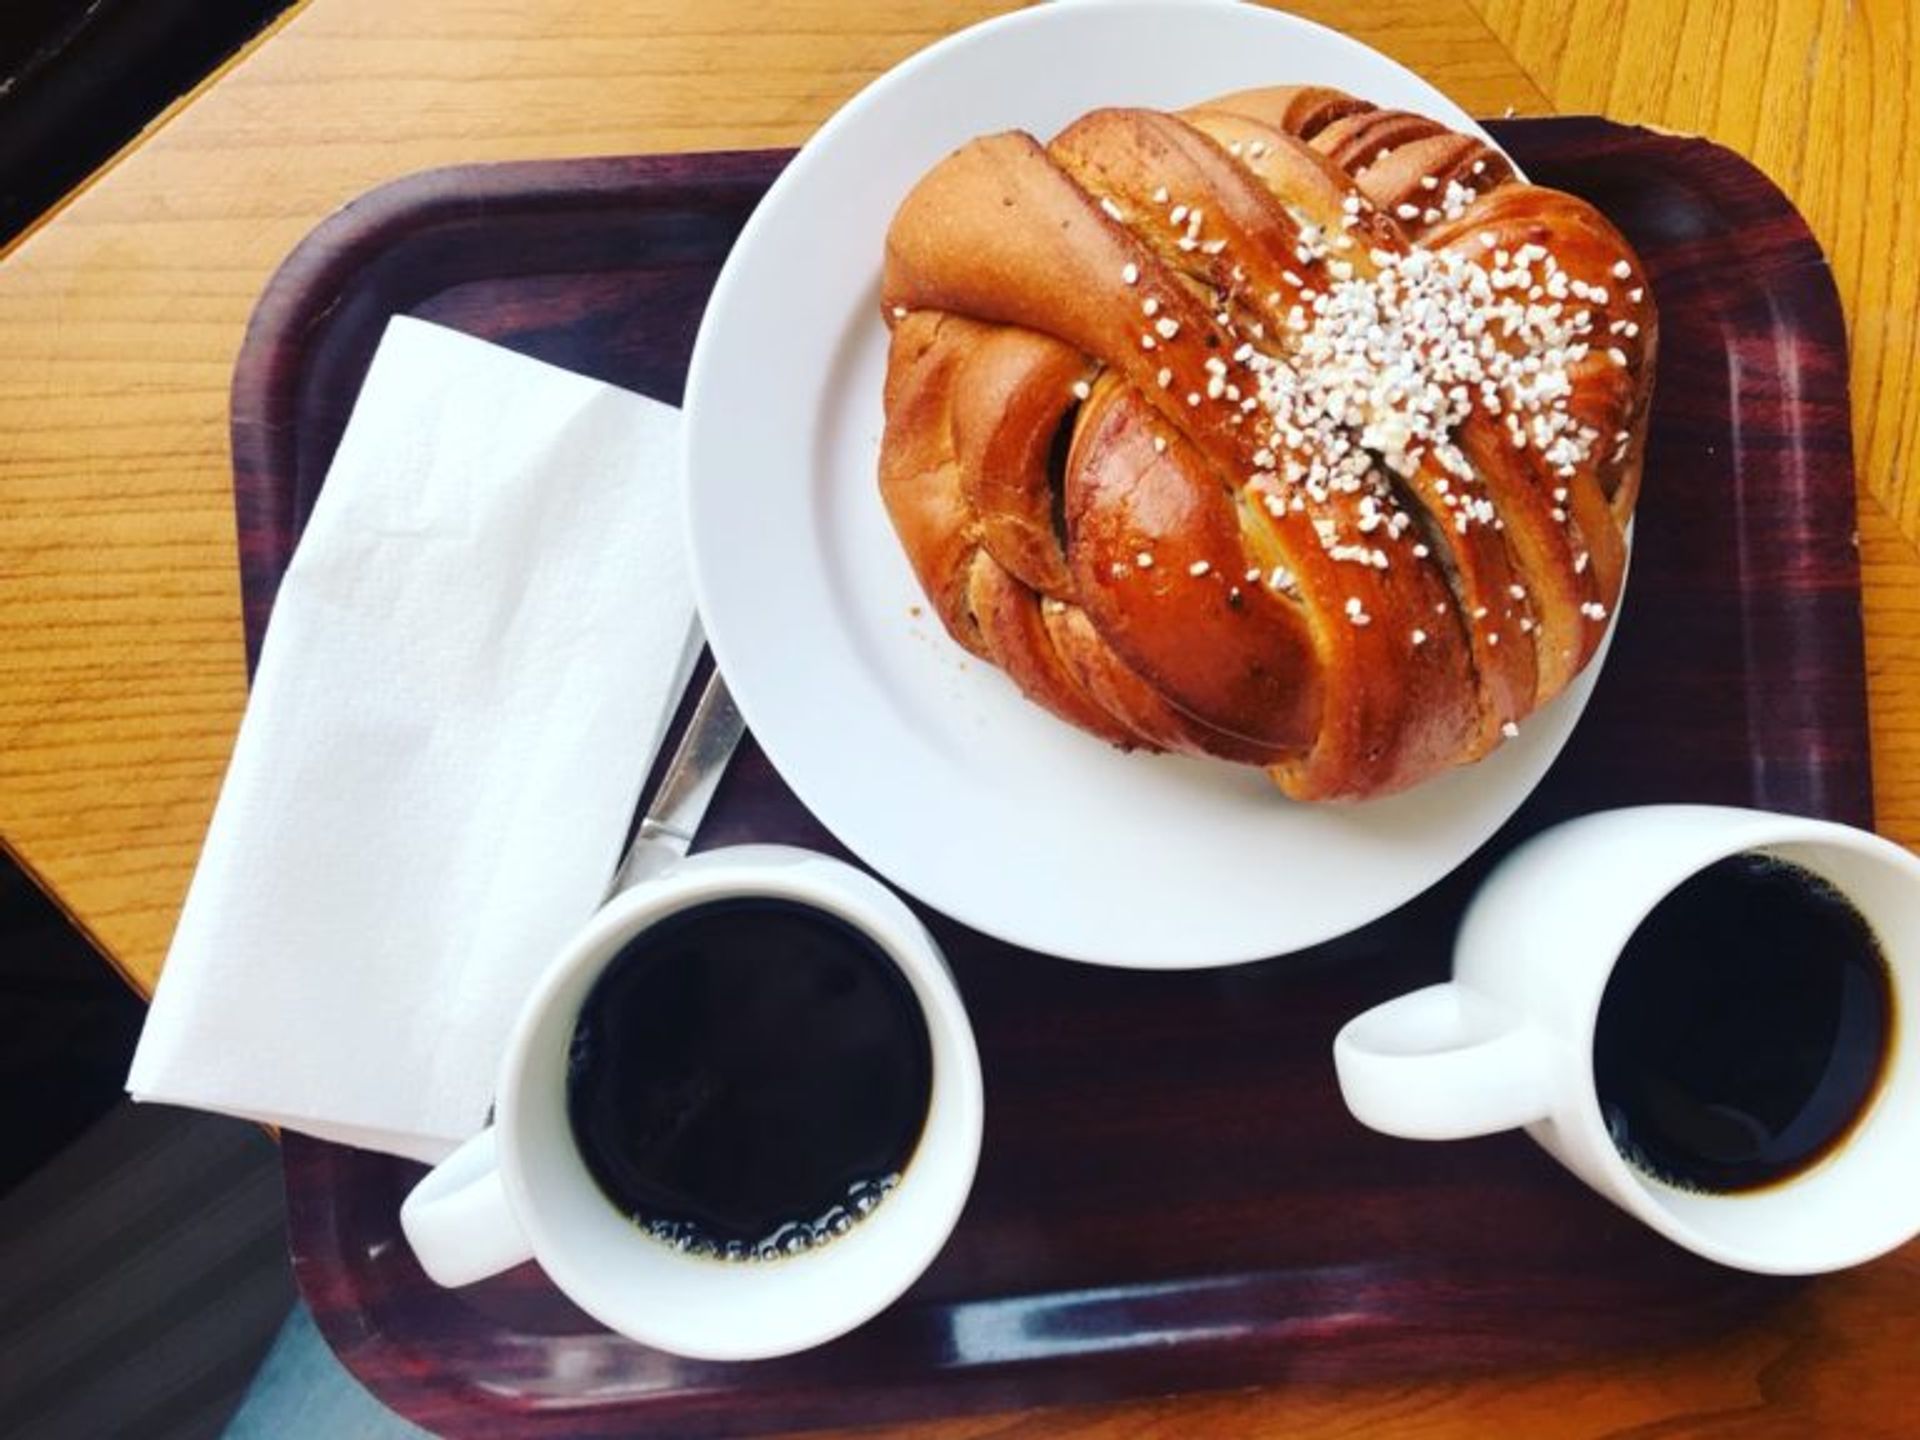 Close-up of a tray with two coffee cups and a cinnamon bun.